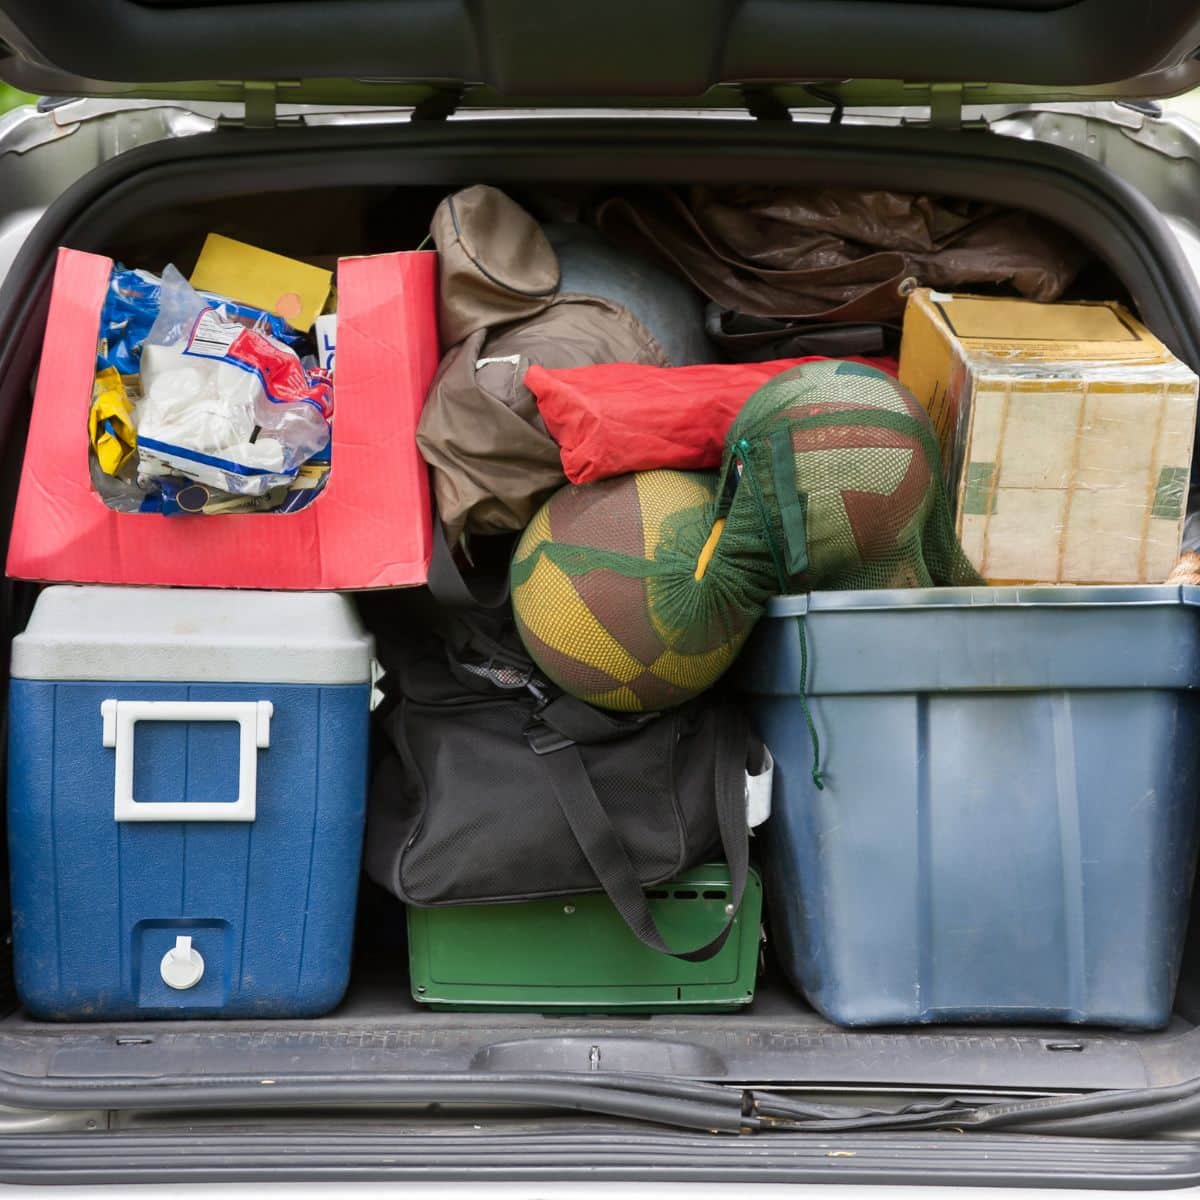 The back of an SUV filled with camping supplies and coolers.